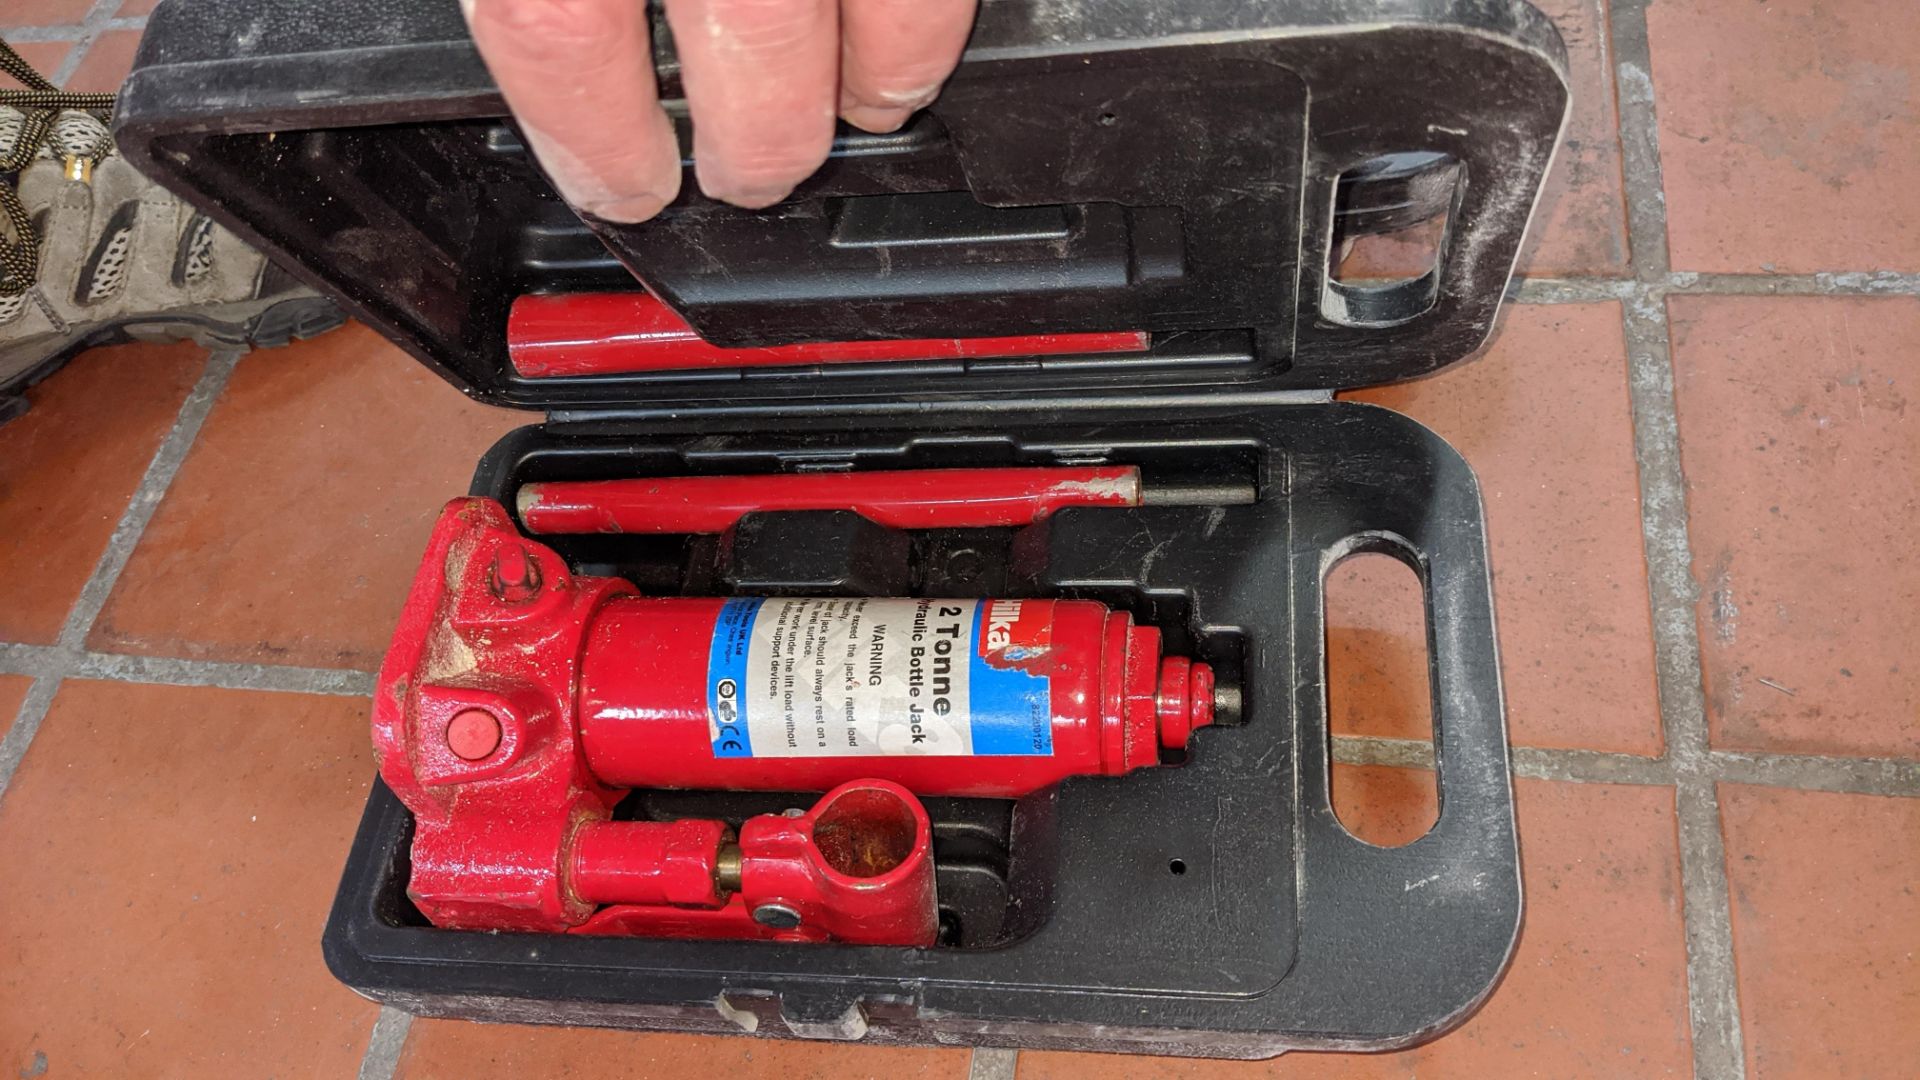 Pair of 2 tonne hydraulic bottle jacks each in their own case Lots 1 to 39 comprise the total assets - Image 4 of 4